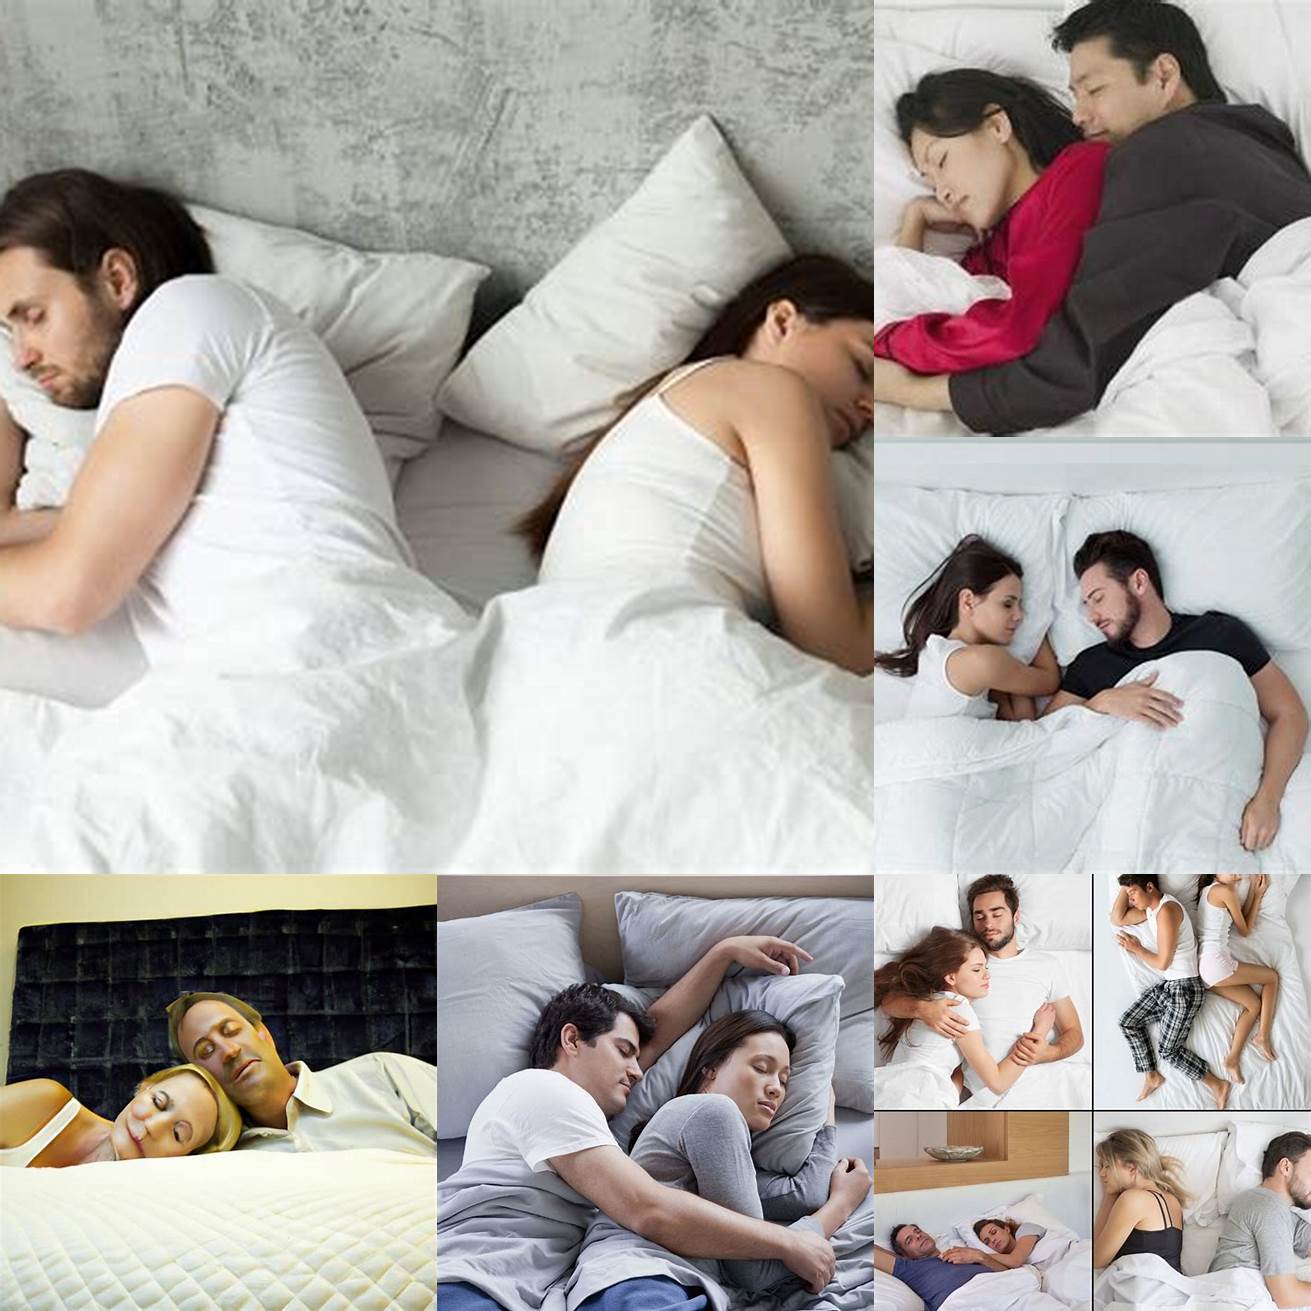 Provides ample space for couples to sleep comfortably